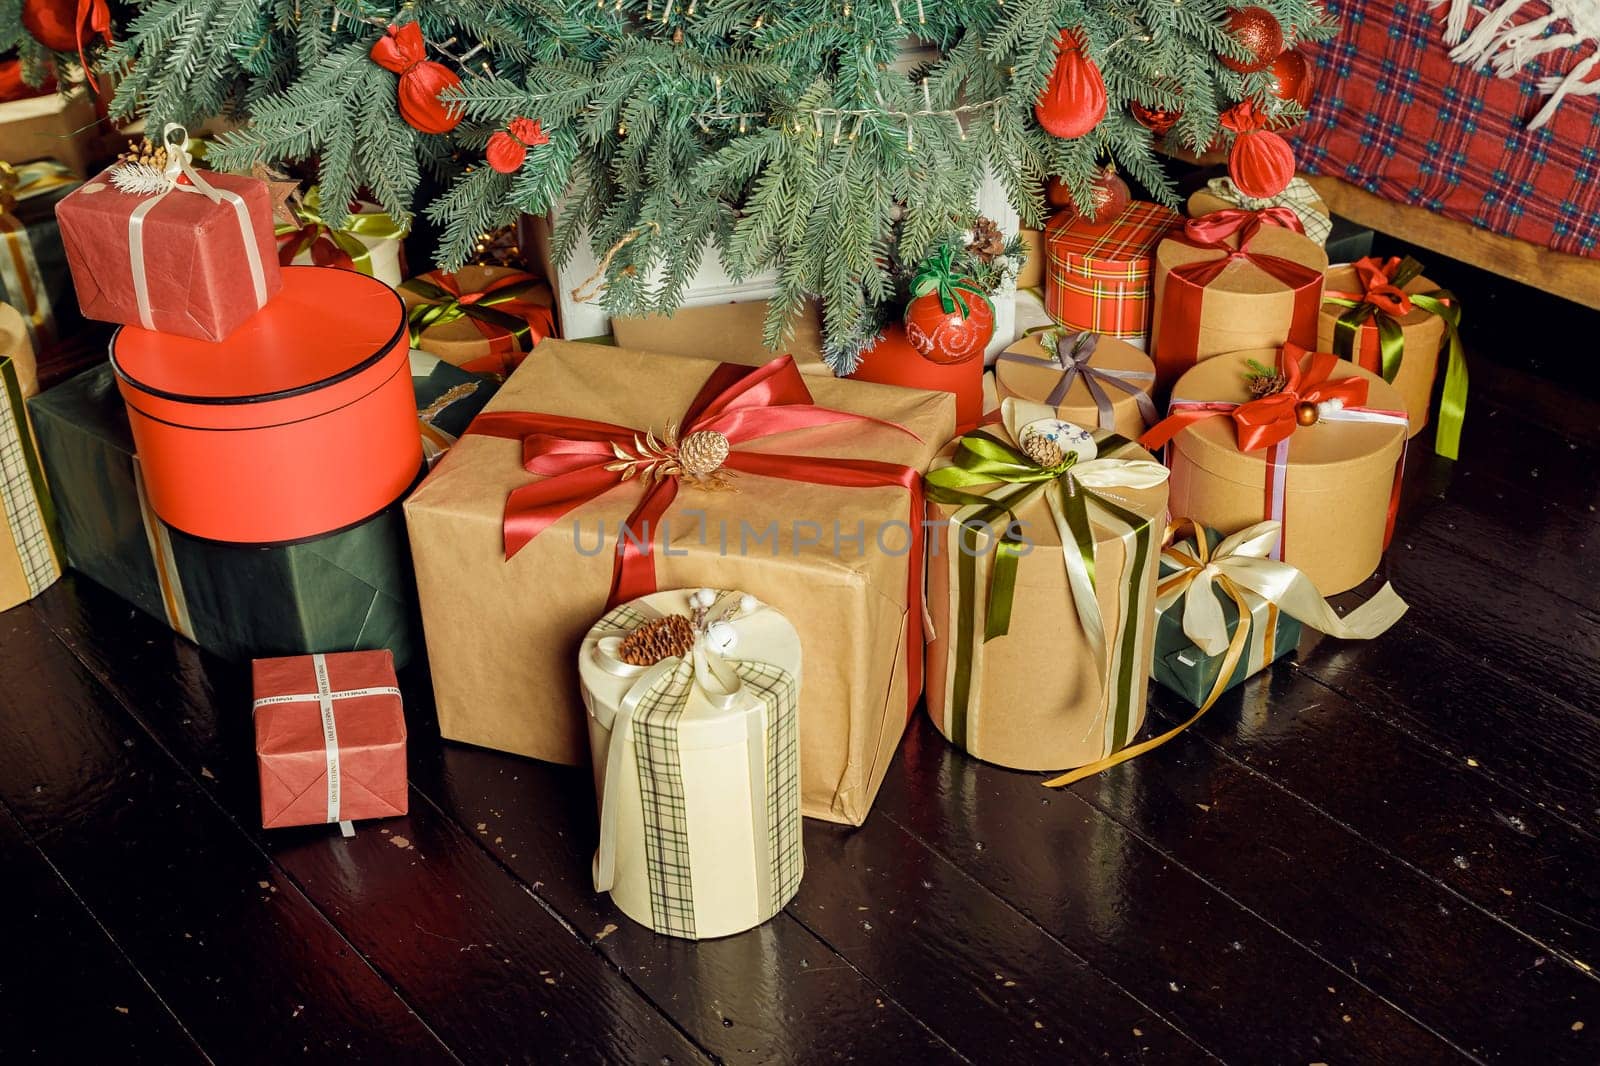 Christmas background with red gift boxes decorated with golden ribbon on floor and child toys under Christmas tree, copy space. Winter holidays concept